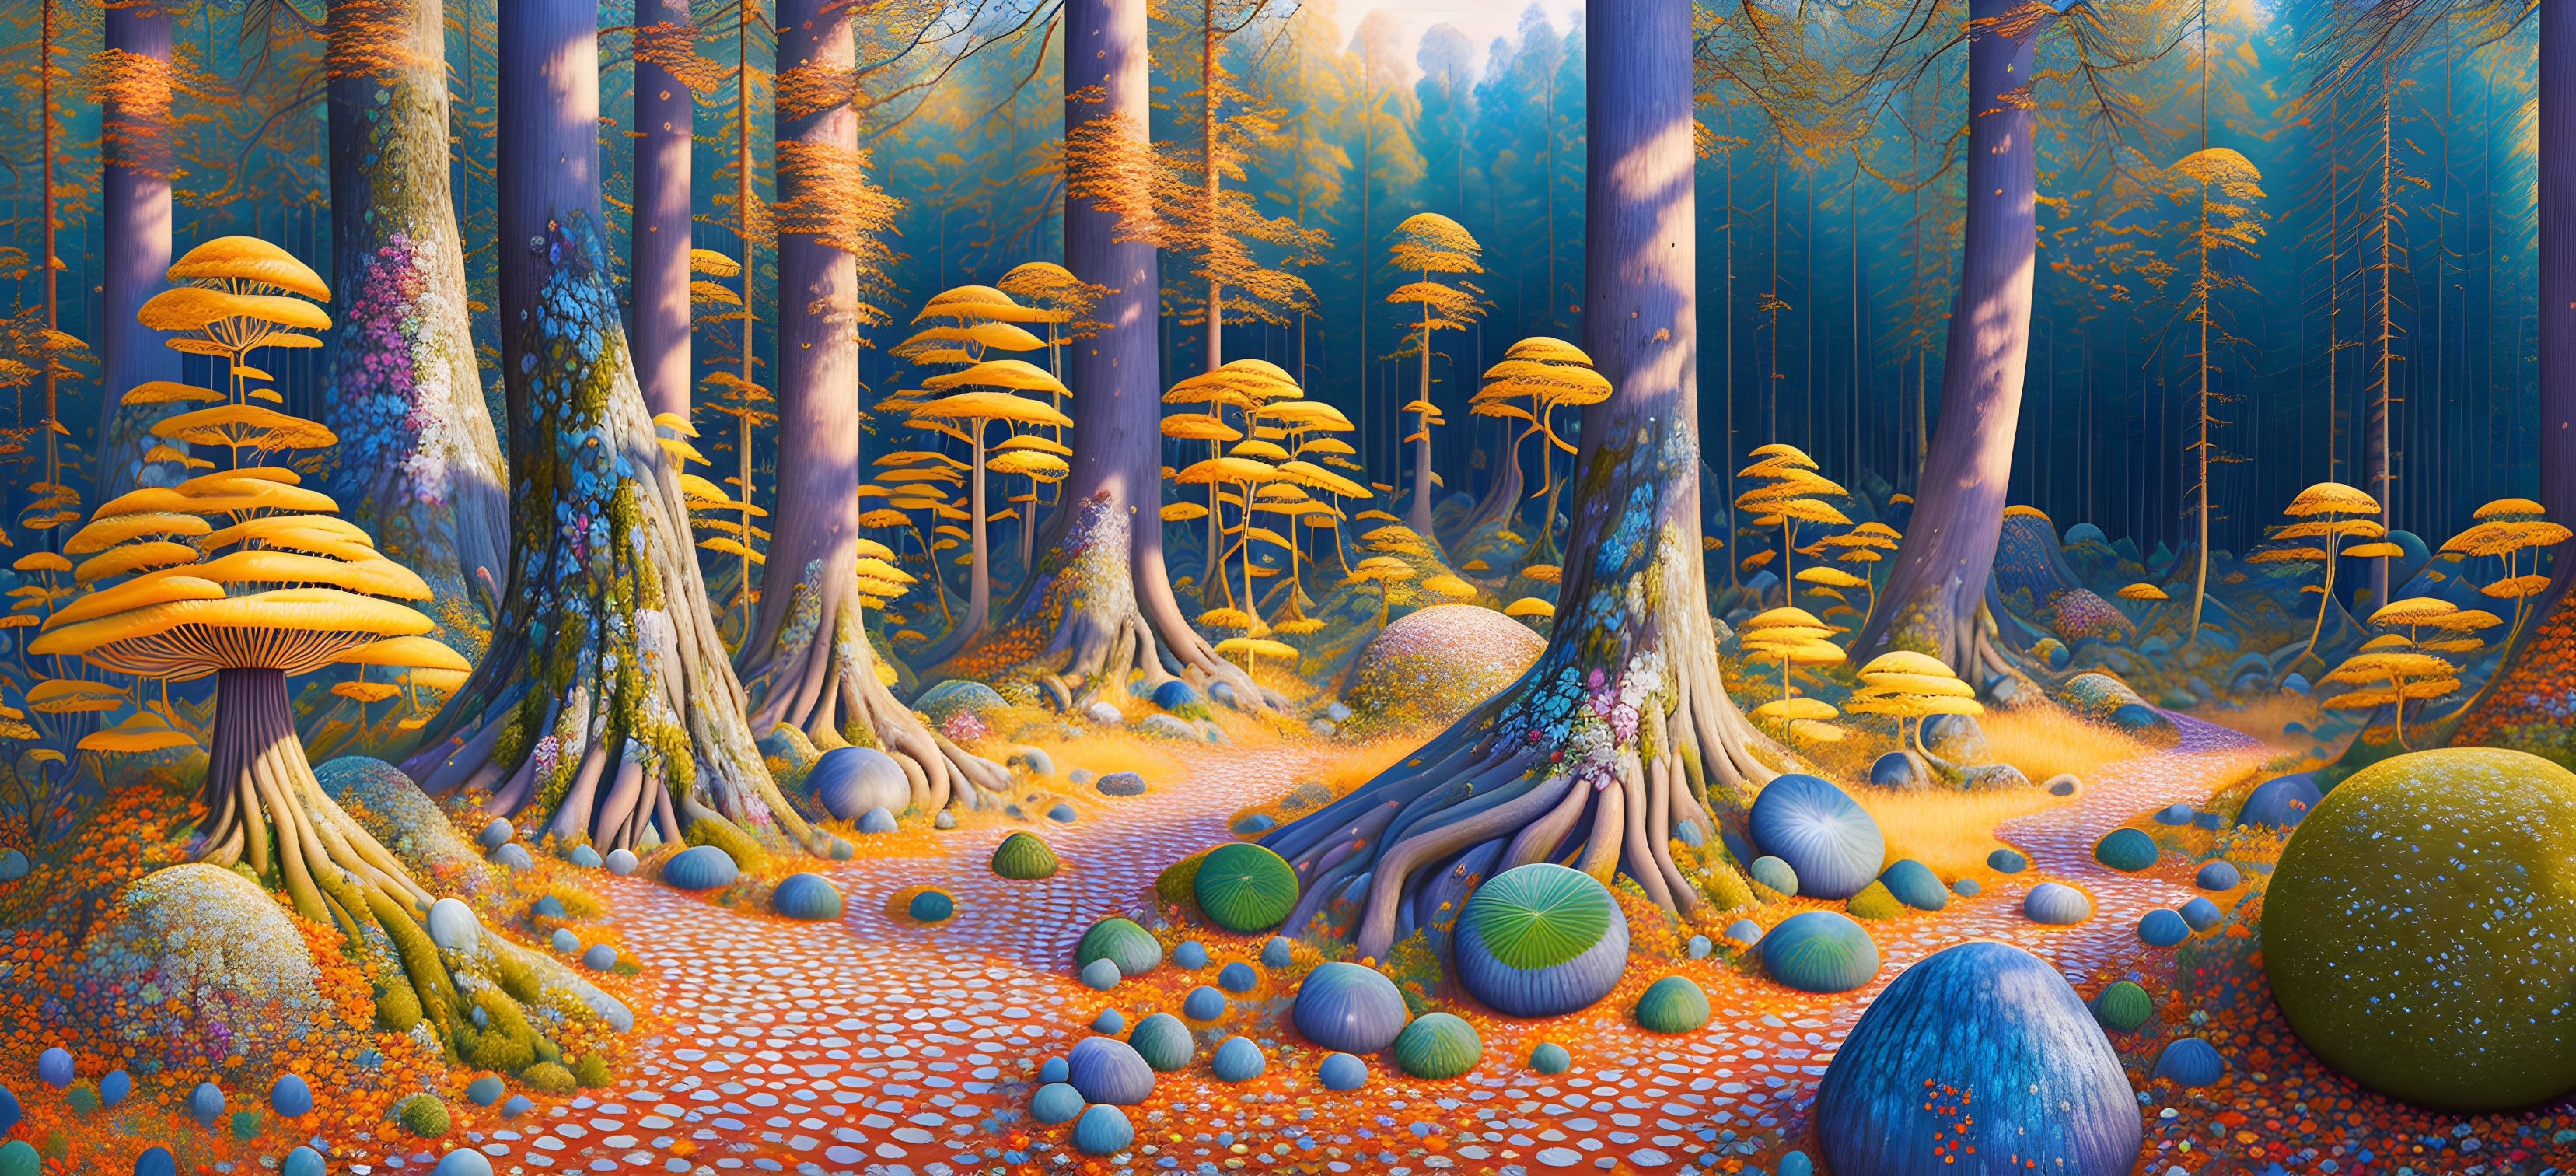 Colorful oversized mushrooms in vibrant fantasy forest